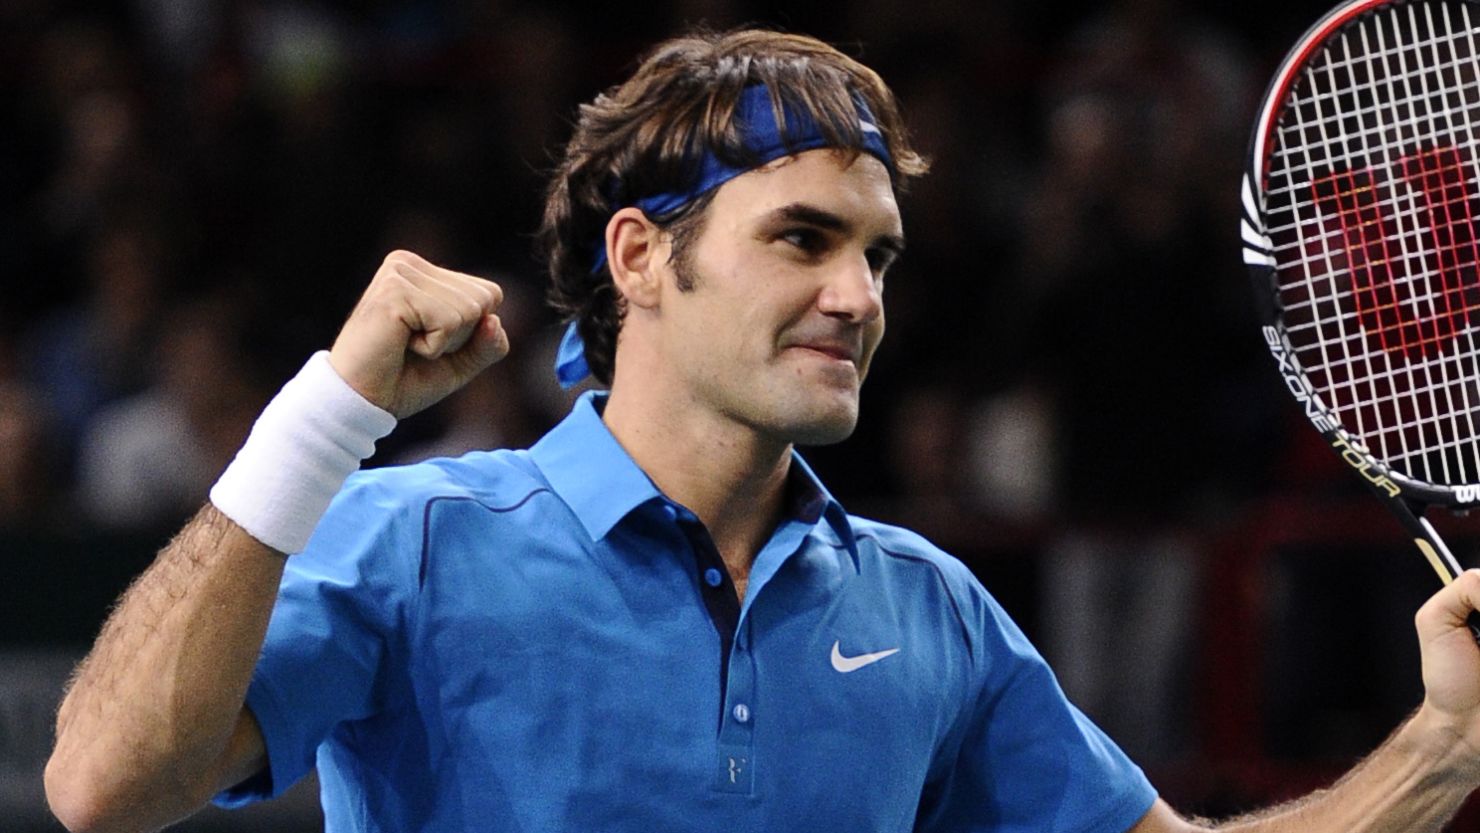 Roger Federer celebrates his straight sets win over Tomas Berdych in Paris